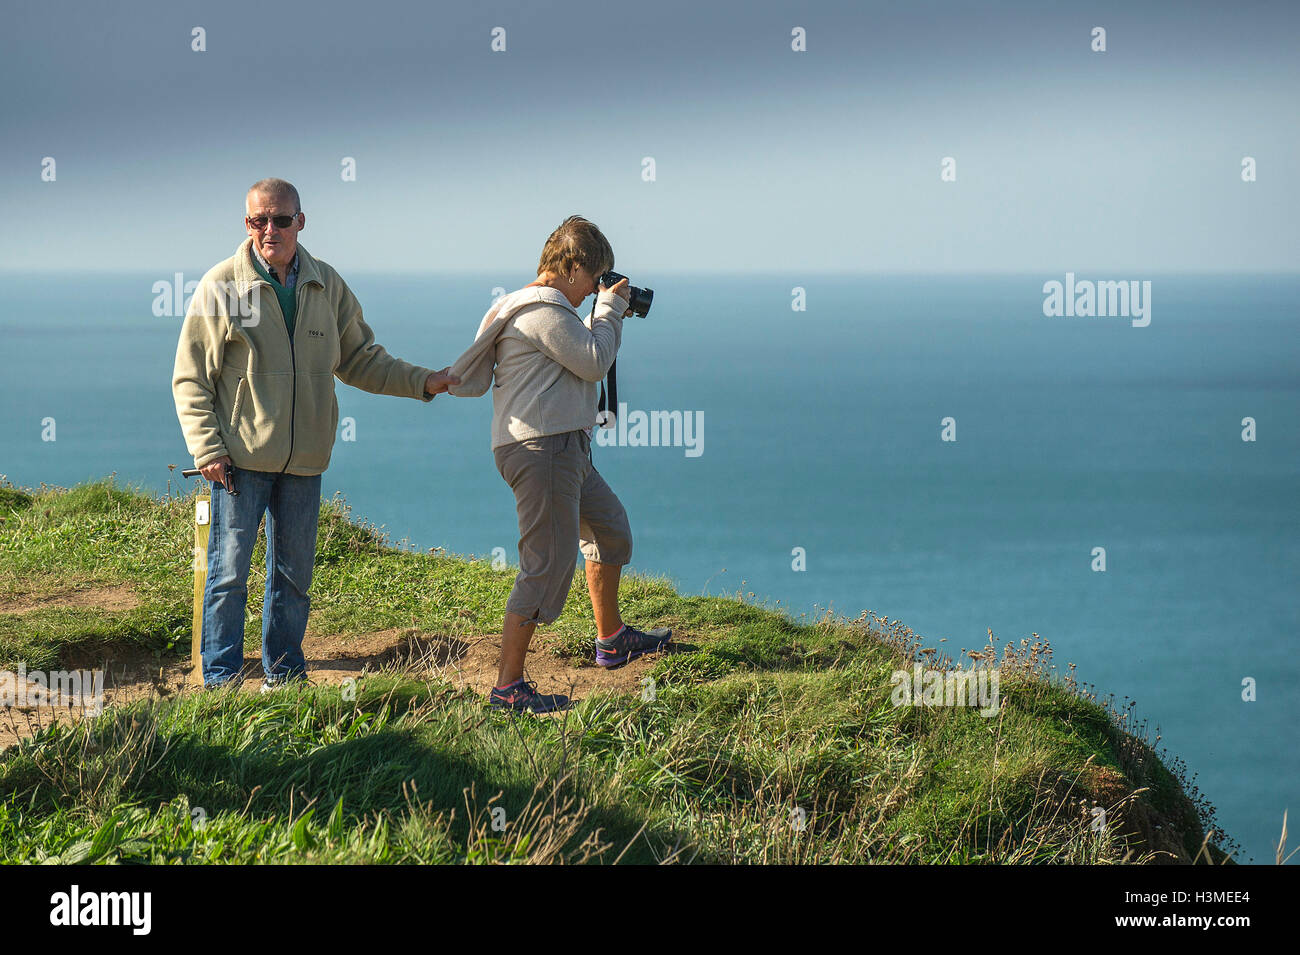 A man holds on to his wife’s clothing as she stand on the edge of a cliff to take a photograph. Stock Photo